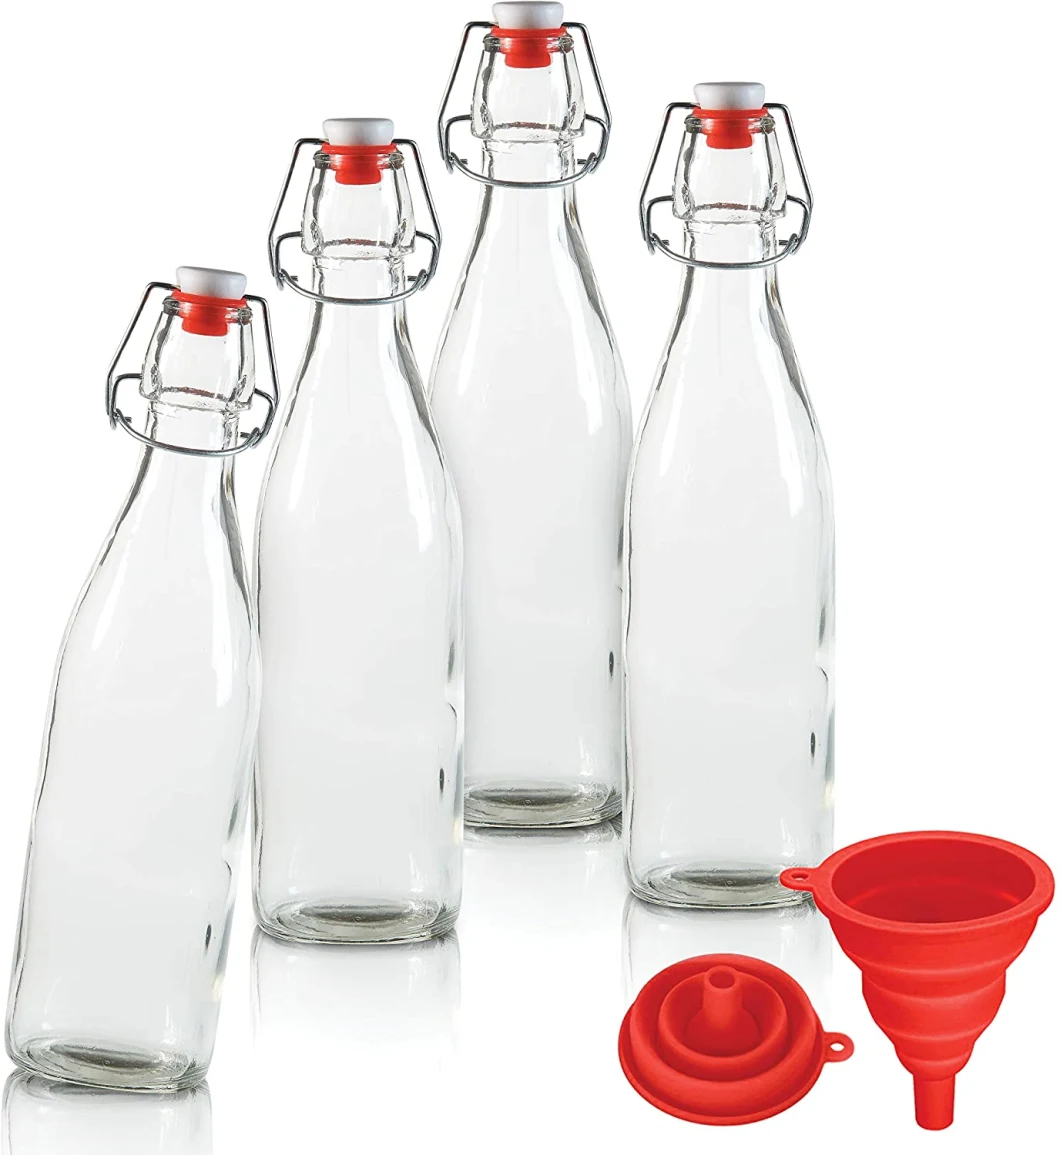 Glass Swing Top Bottles with Funnel - Set of 4 - Clear Grolsch Bottle with Flip Top Lids - for Home Brewing Beer, Wine, Soda, Kombucha Fermentation - Reusable E